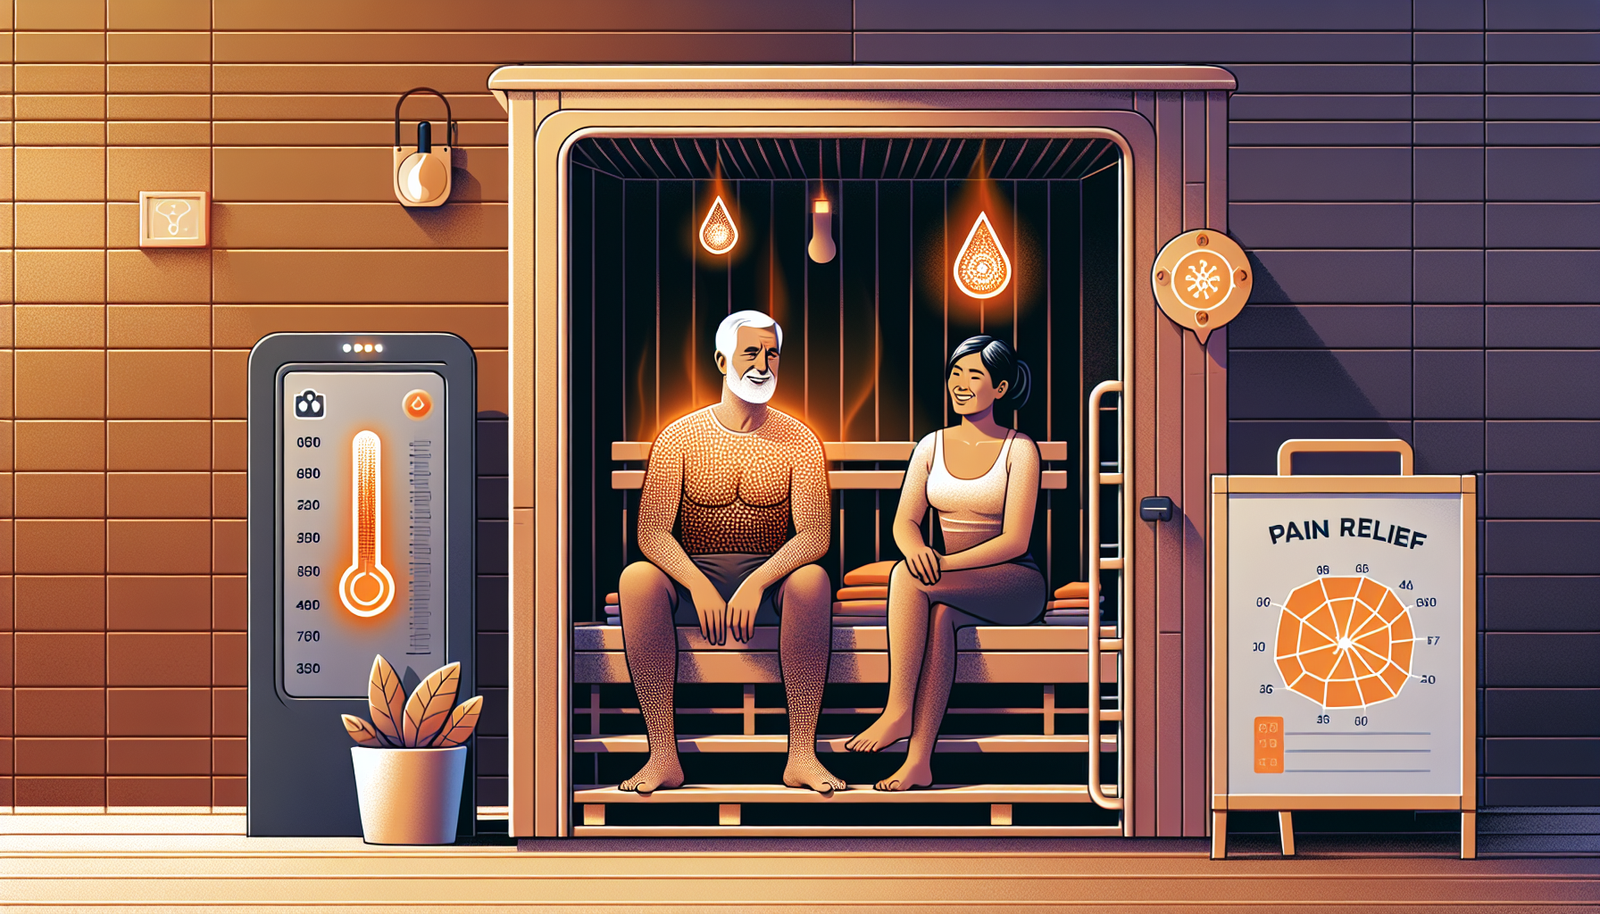 Can Saunas Help With Pain Relief?